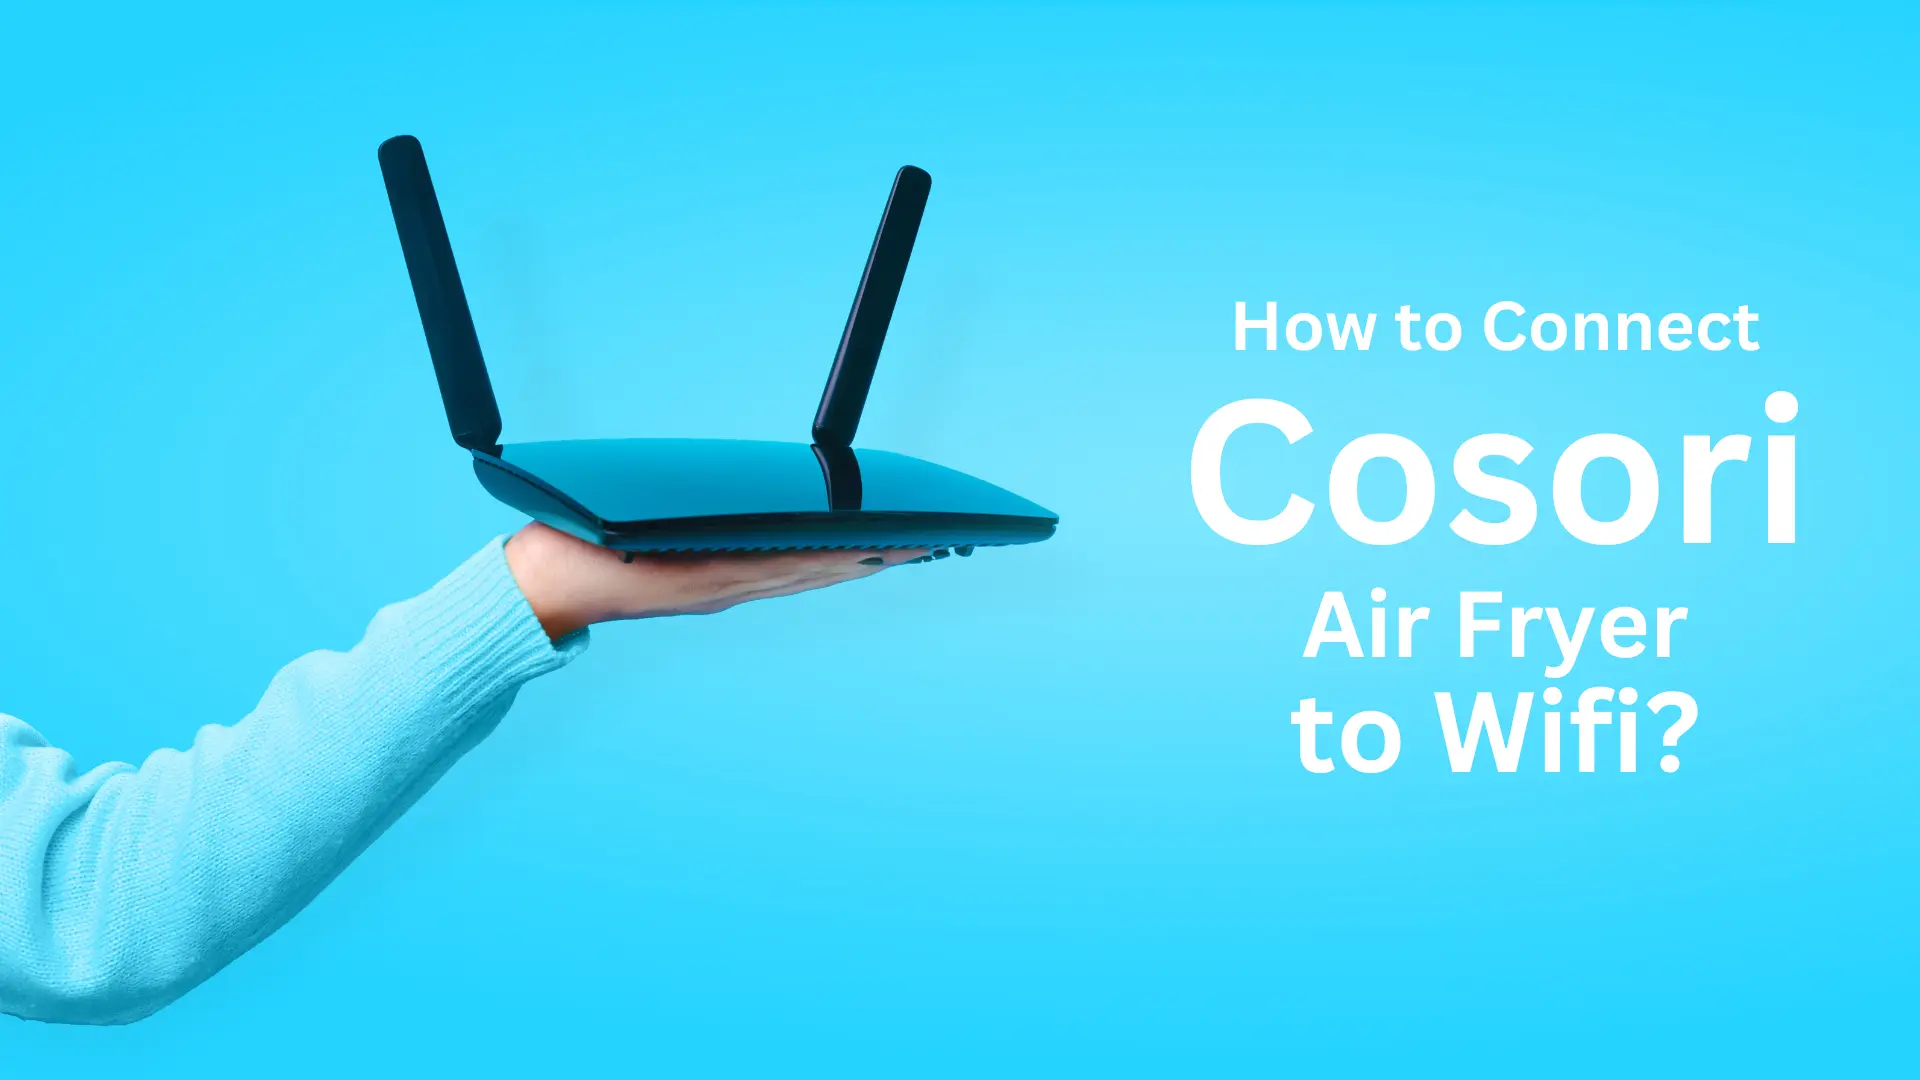 How to Connect Cosori Air Fryer to Wifi